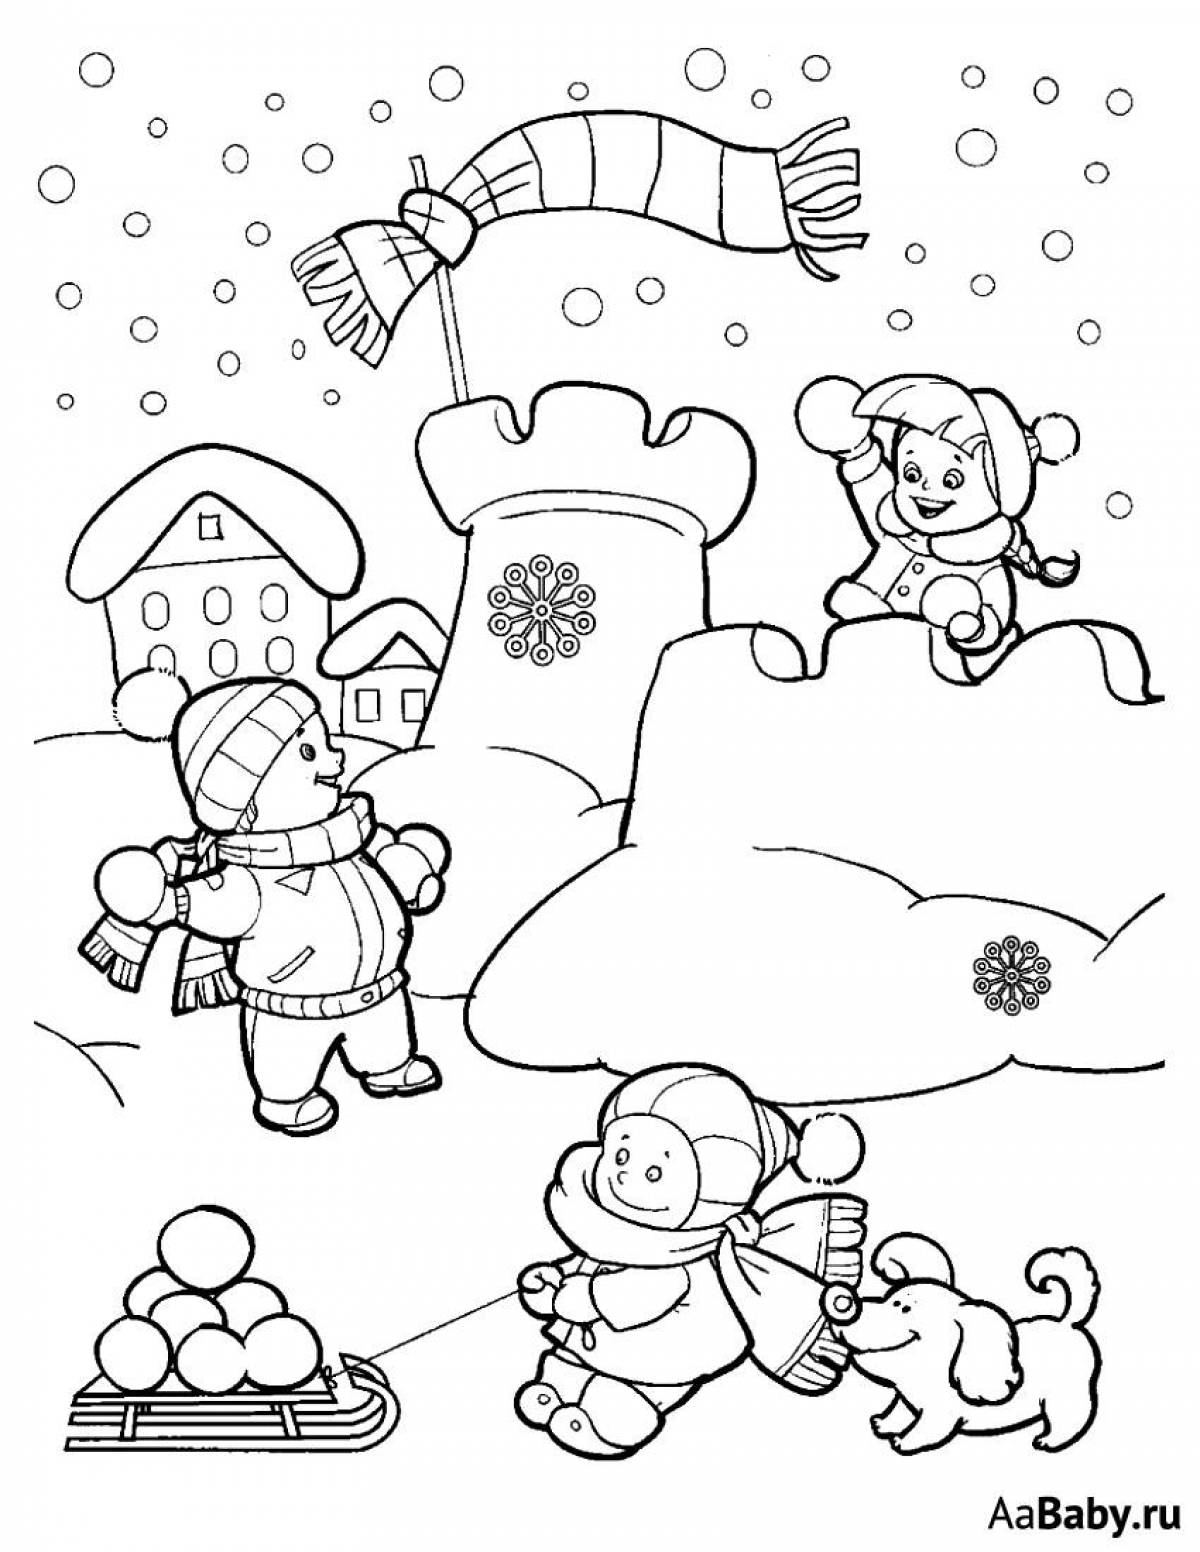 Fantastic coloring book for children winter fun 5-6 years old